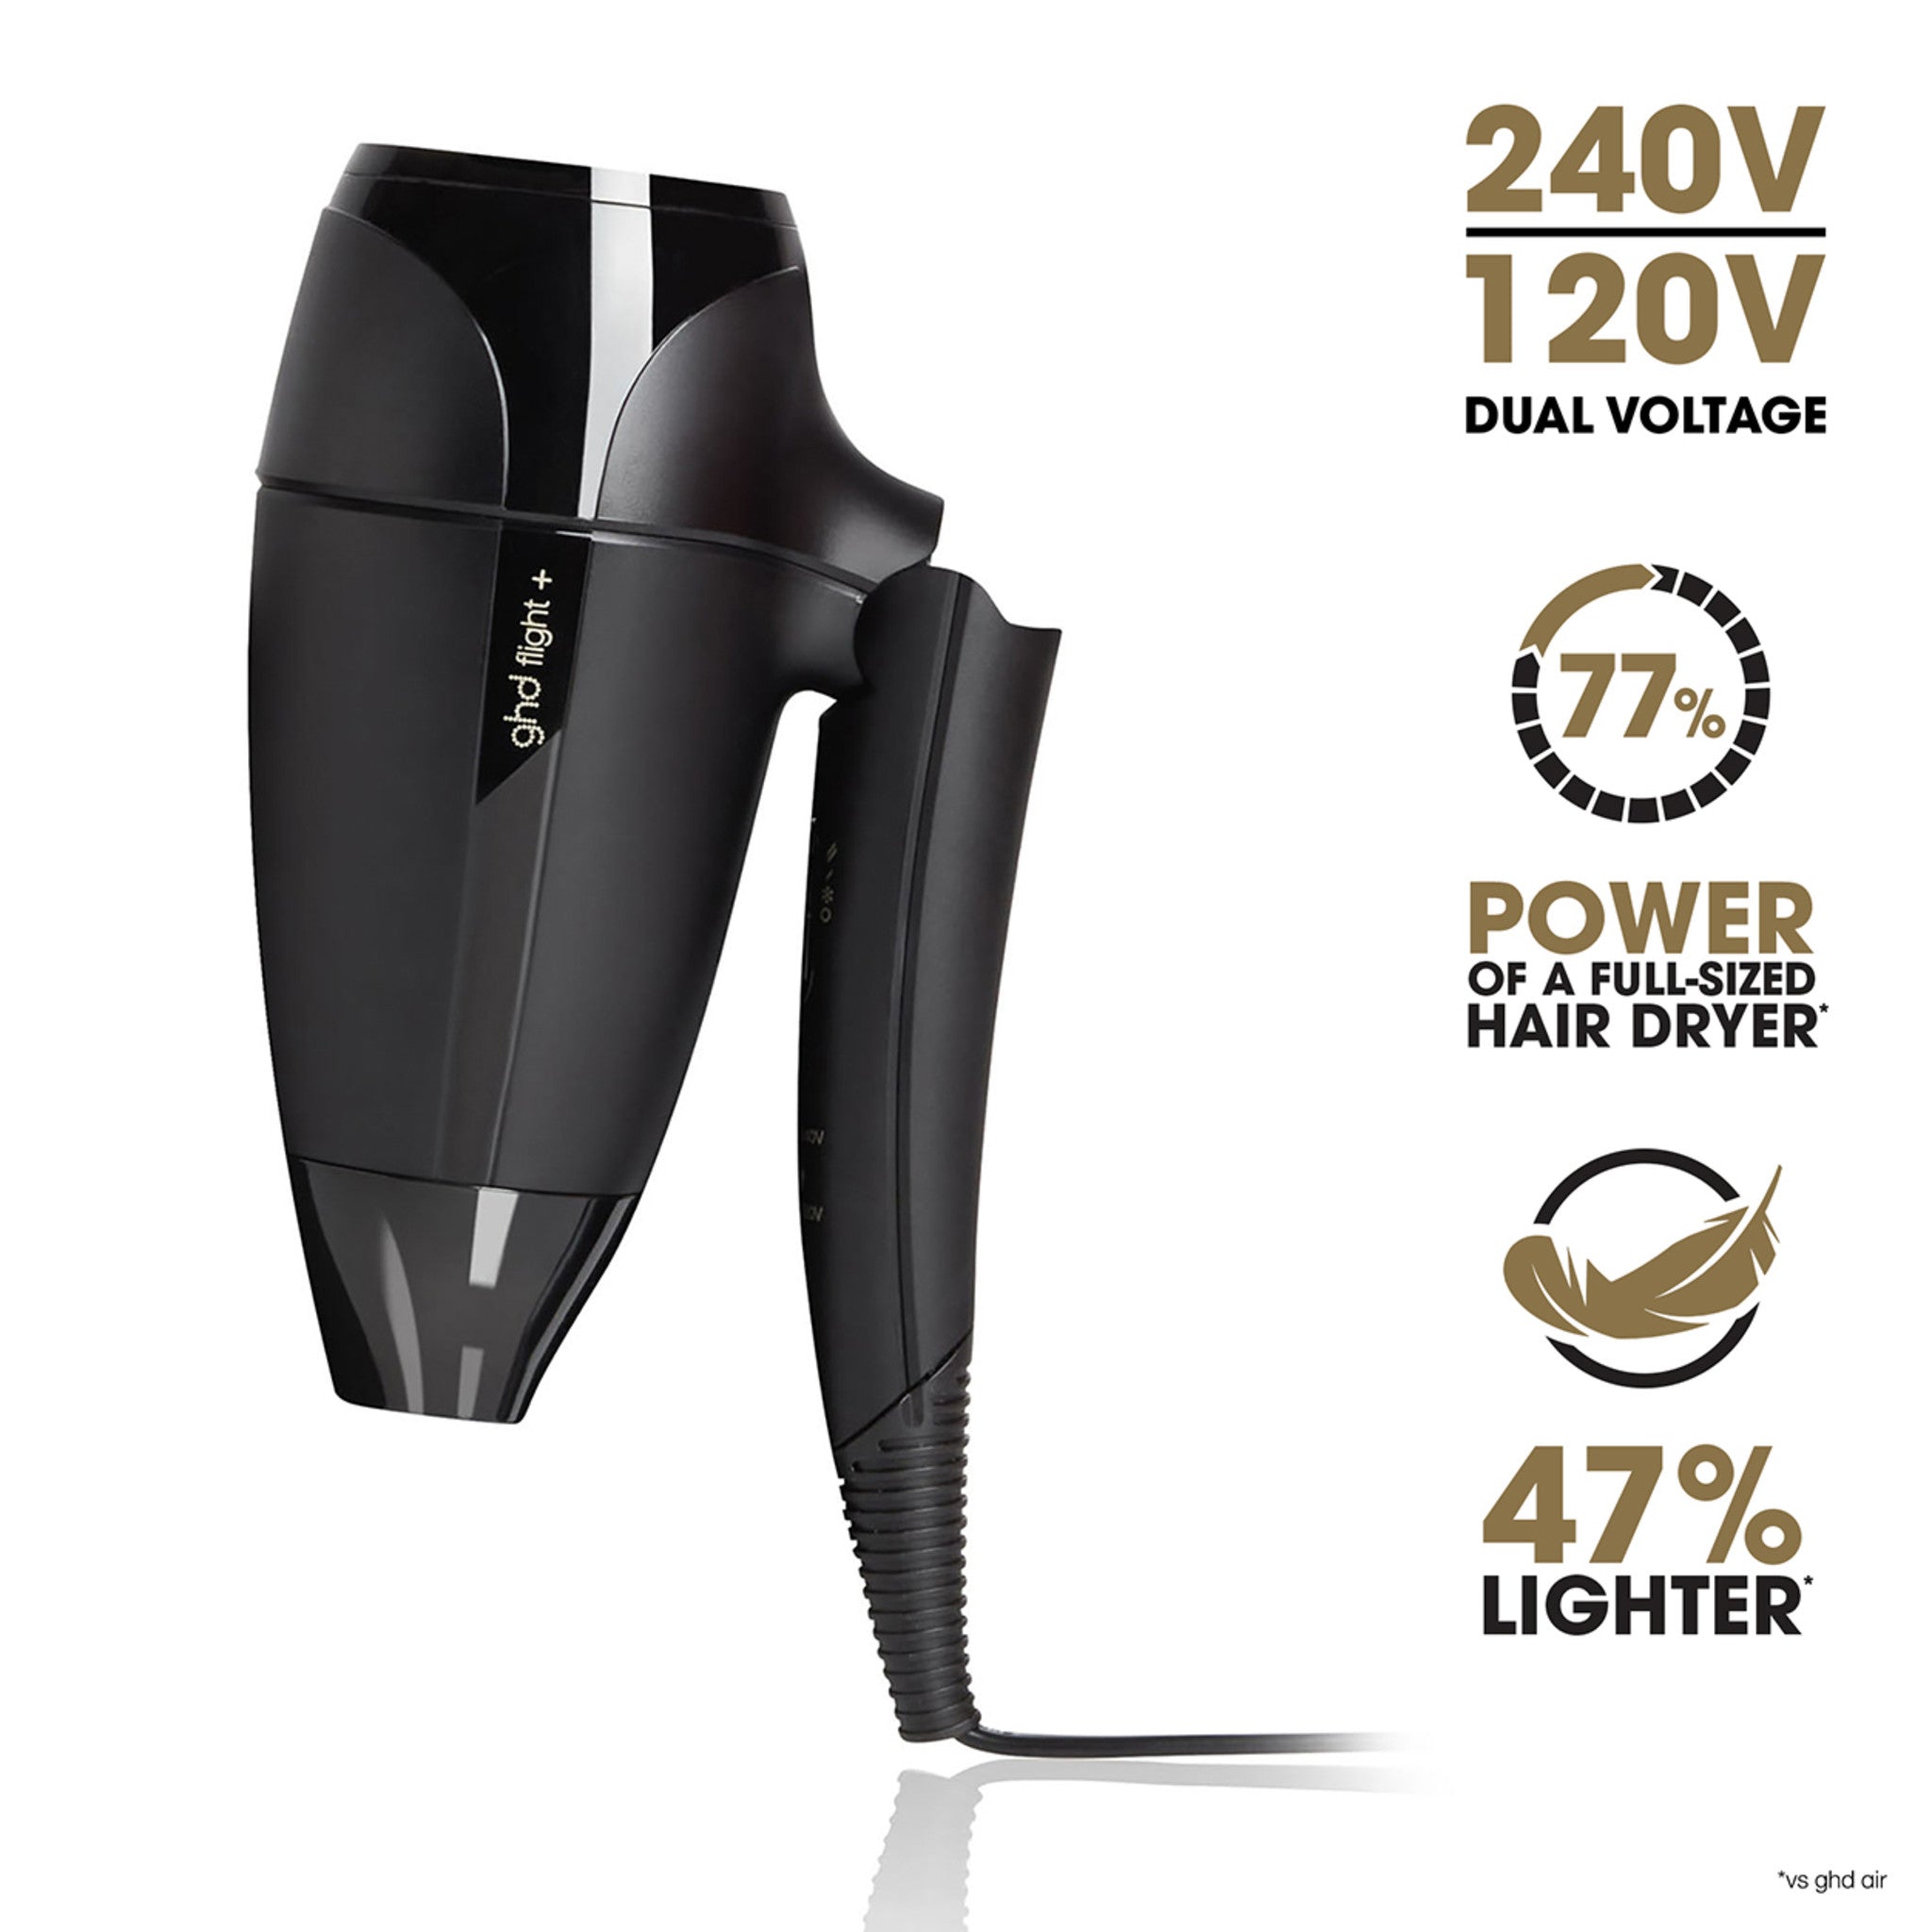 Flight+ - Travel Hair Dryer - Powerful, Lightweight & Compact for All Hair Types